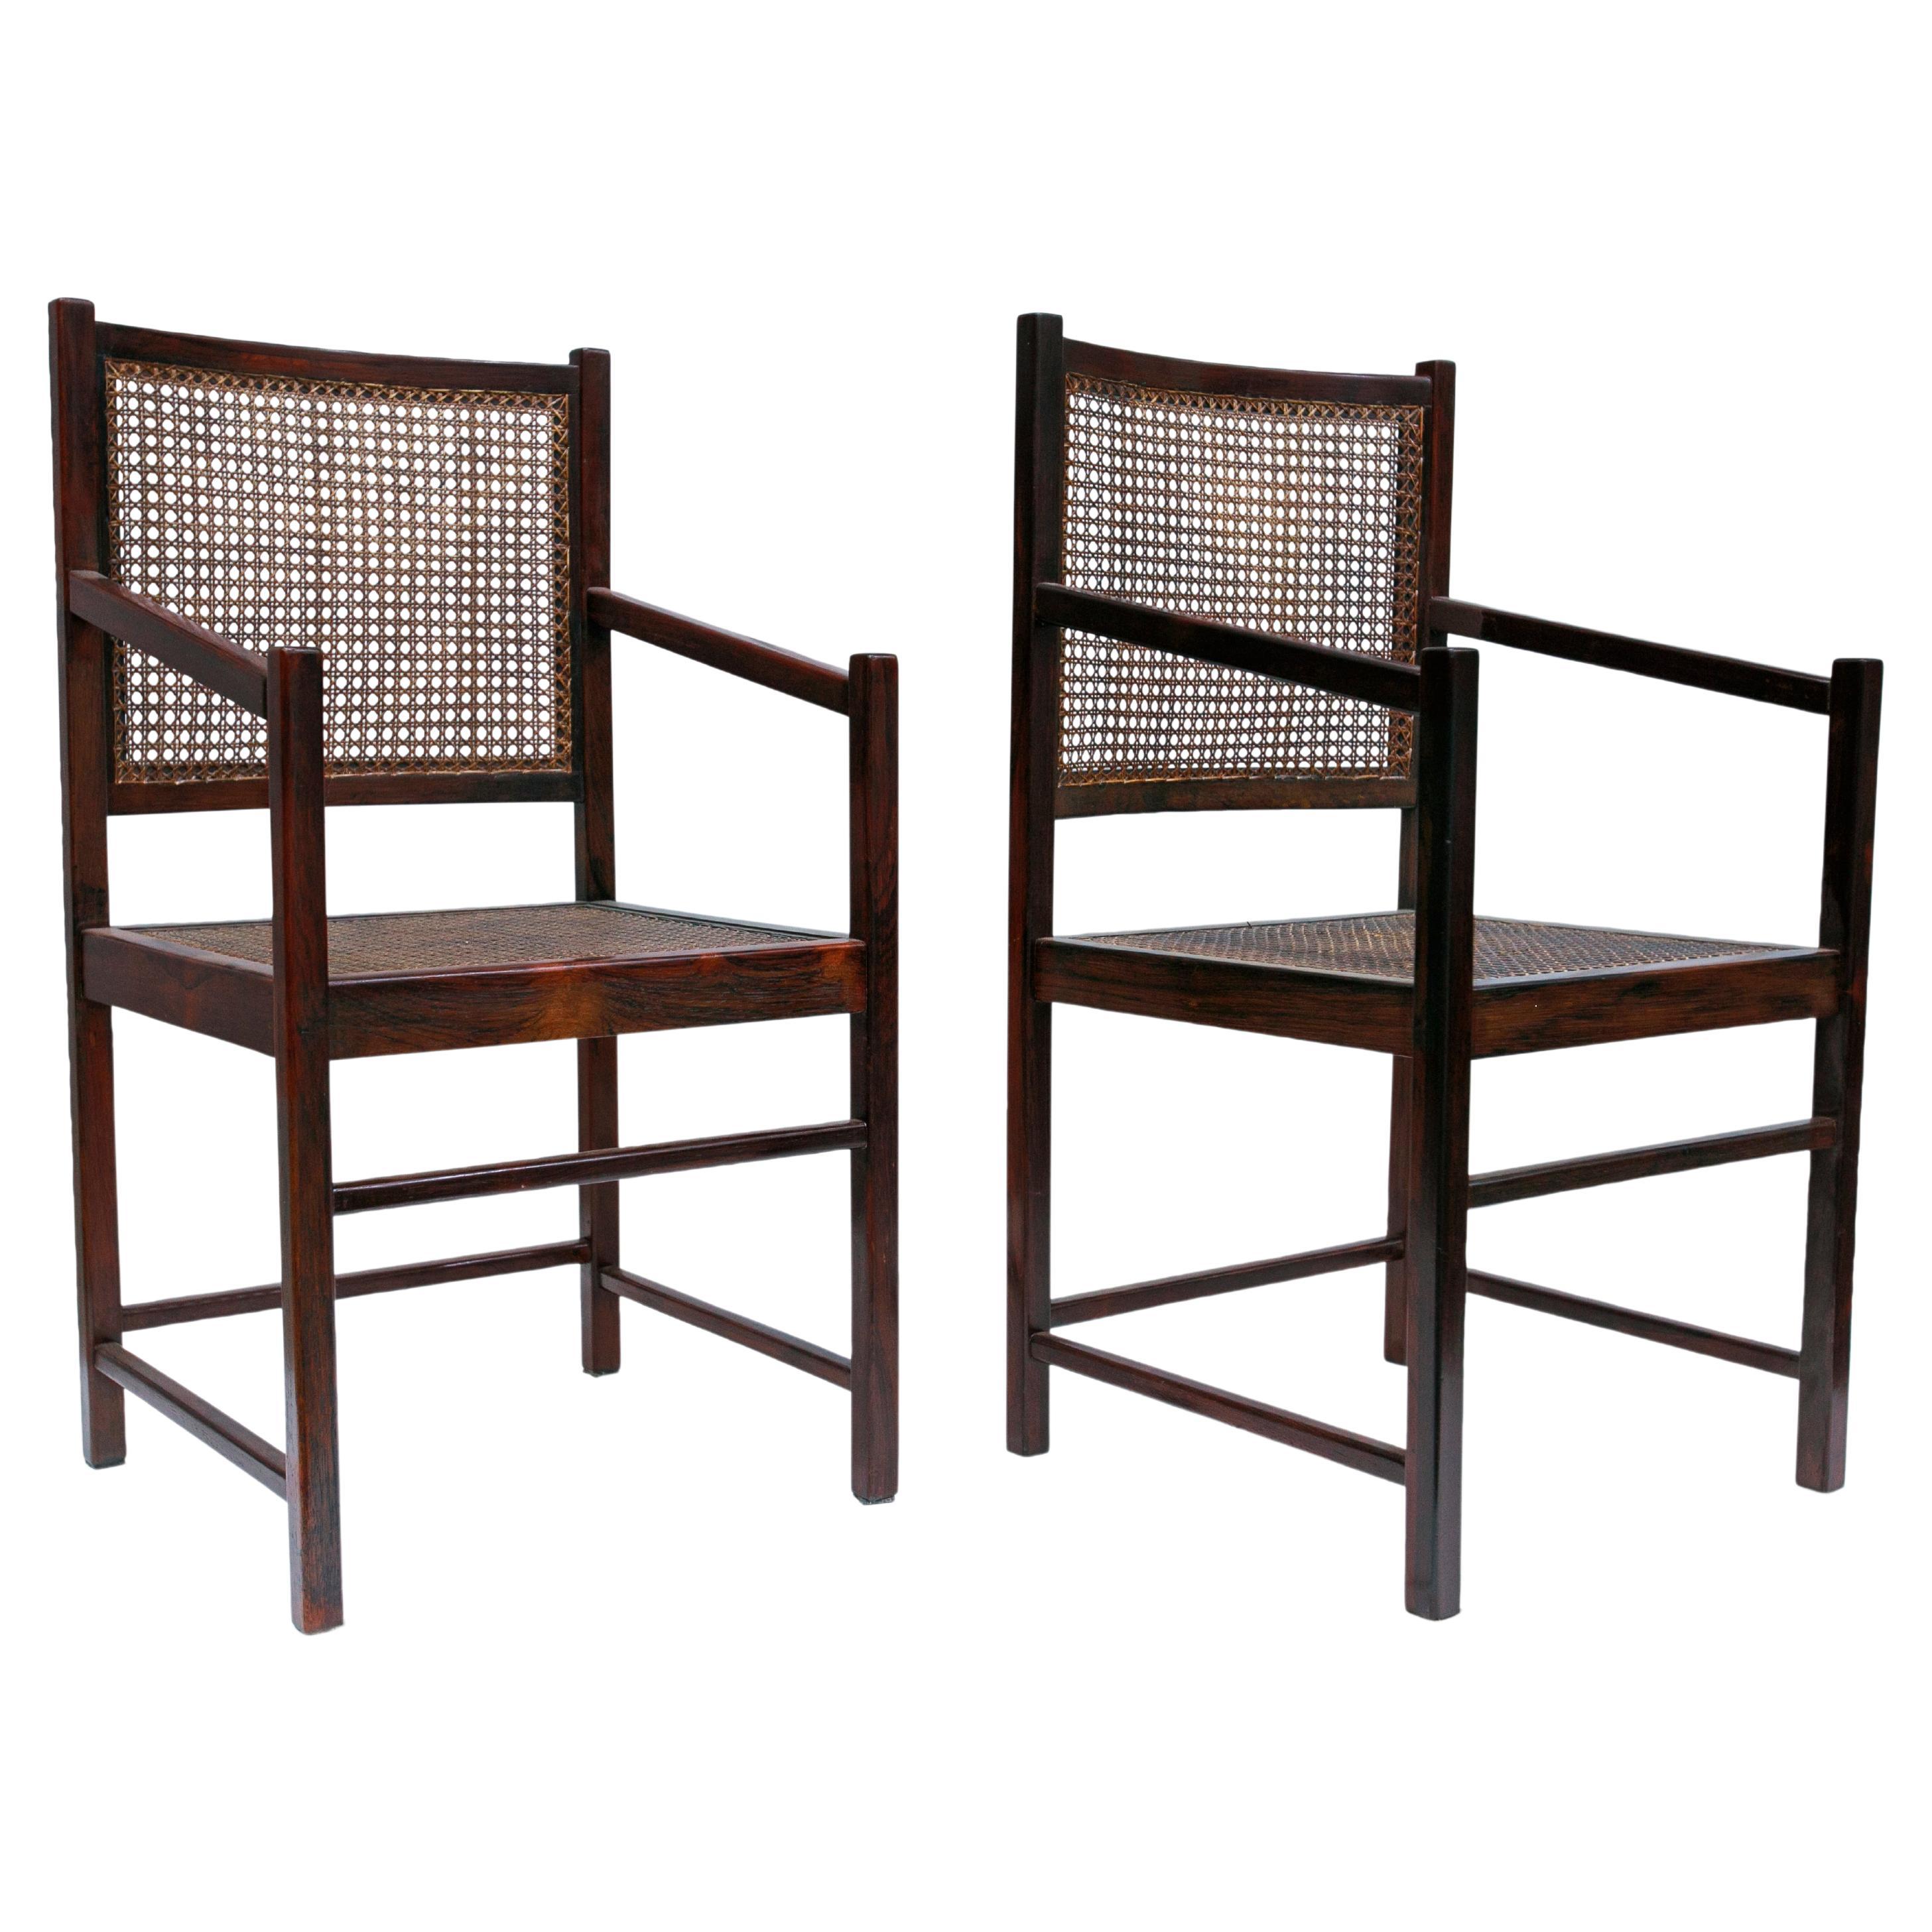 Available today, these Brazilian Modern Tall Armchairs in Hardwood & Handwoven Cane, are exquisite.

The armchairs are made of solid Brazilian Rosewood, as known as Jacaranda and handwoven cane in the seat and back. One of the chairs has new cane